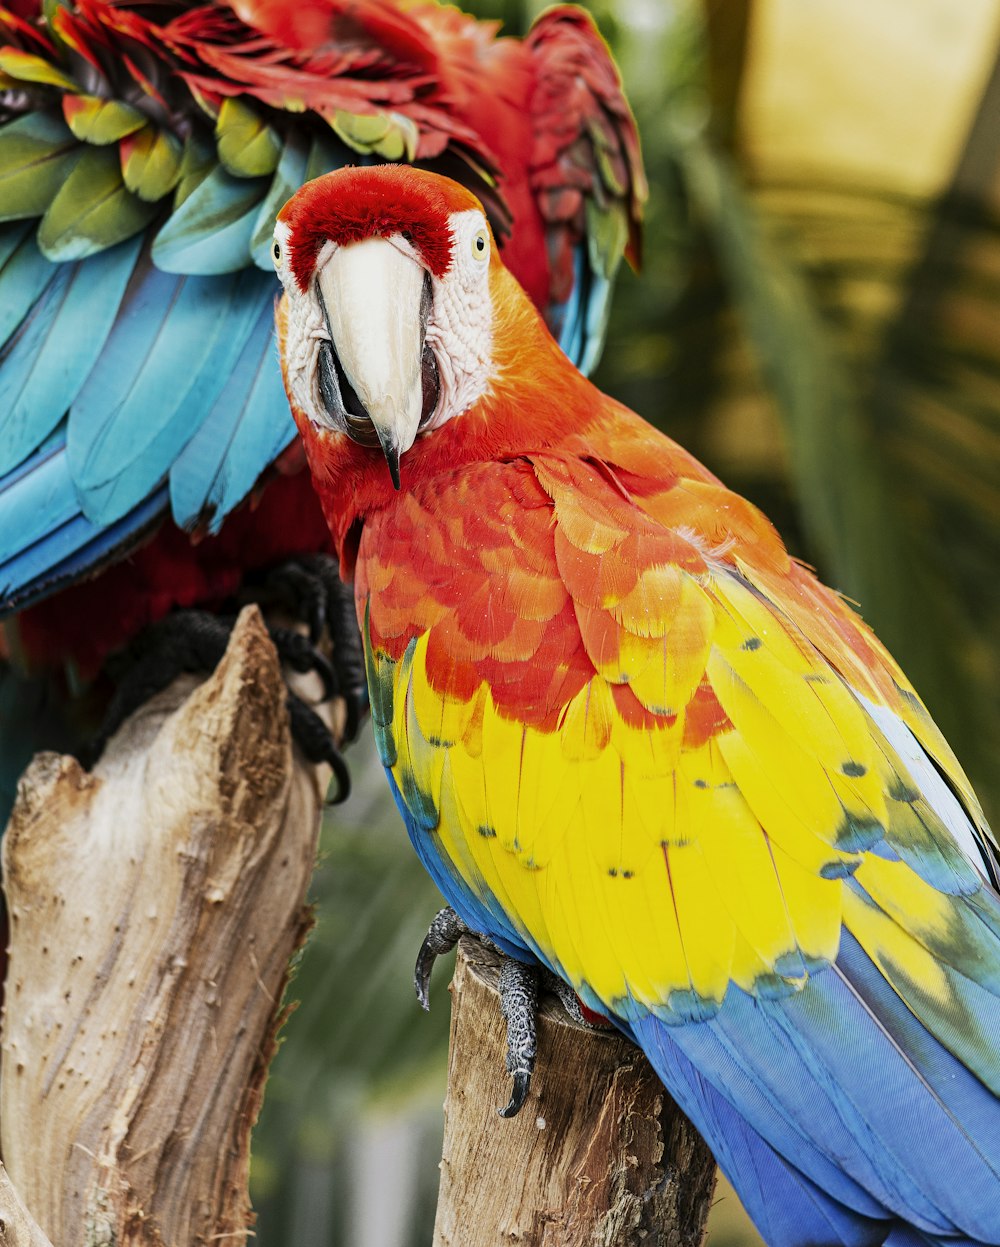 yellow, red, and blue scarlet macaw on tree branch